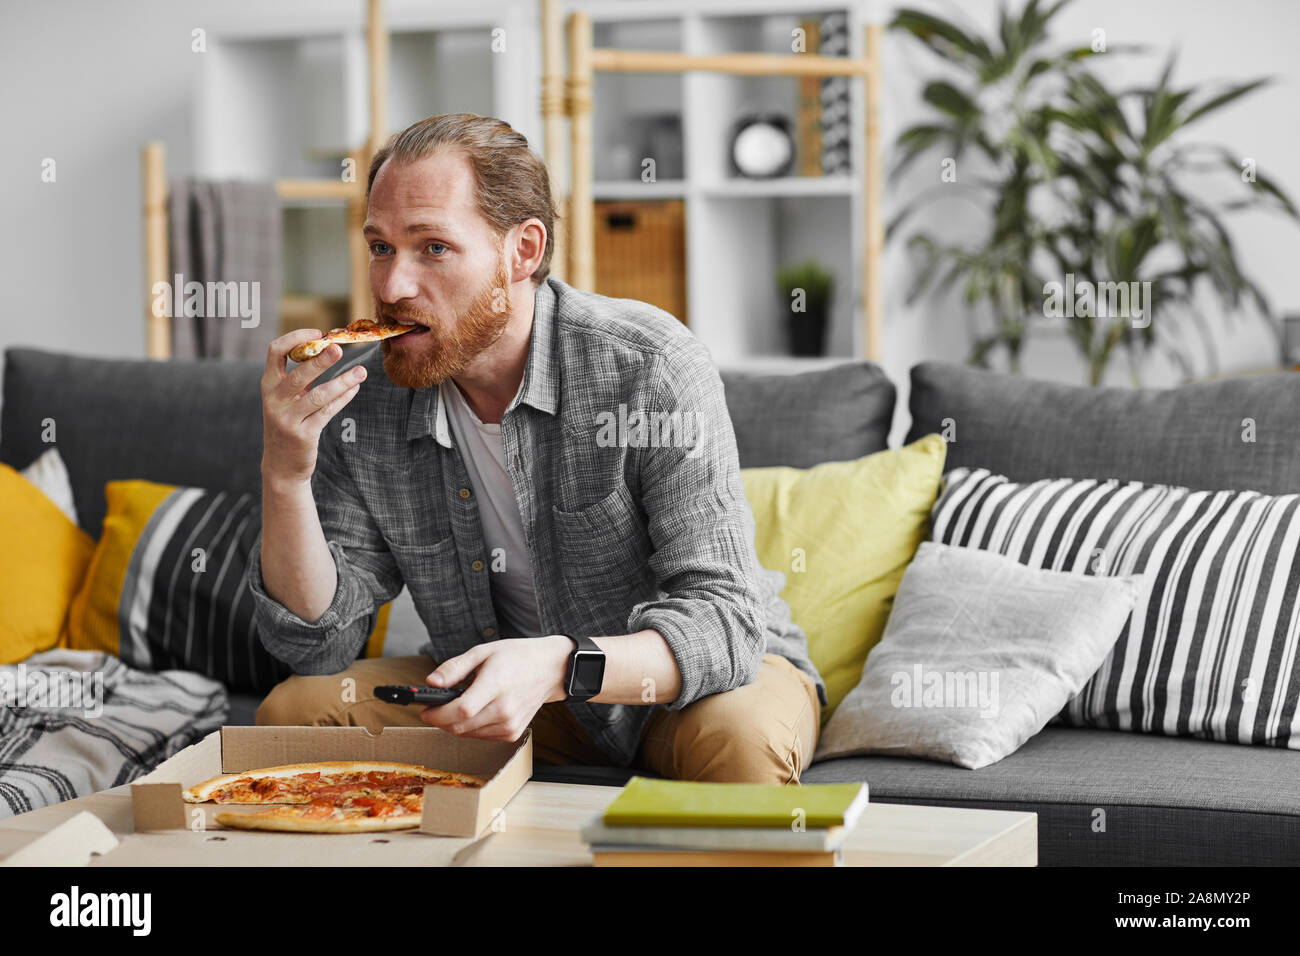 Portrait of middle-aged bearded man watching TV at home and eating pizza during lazy weekend, copy space Stock Photo